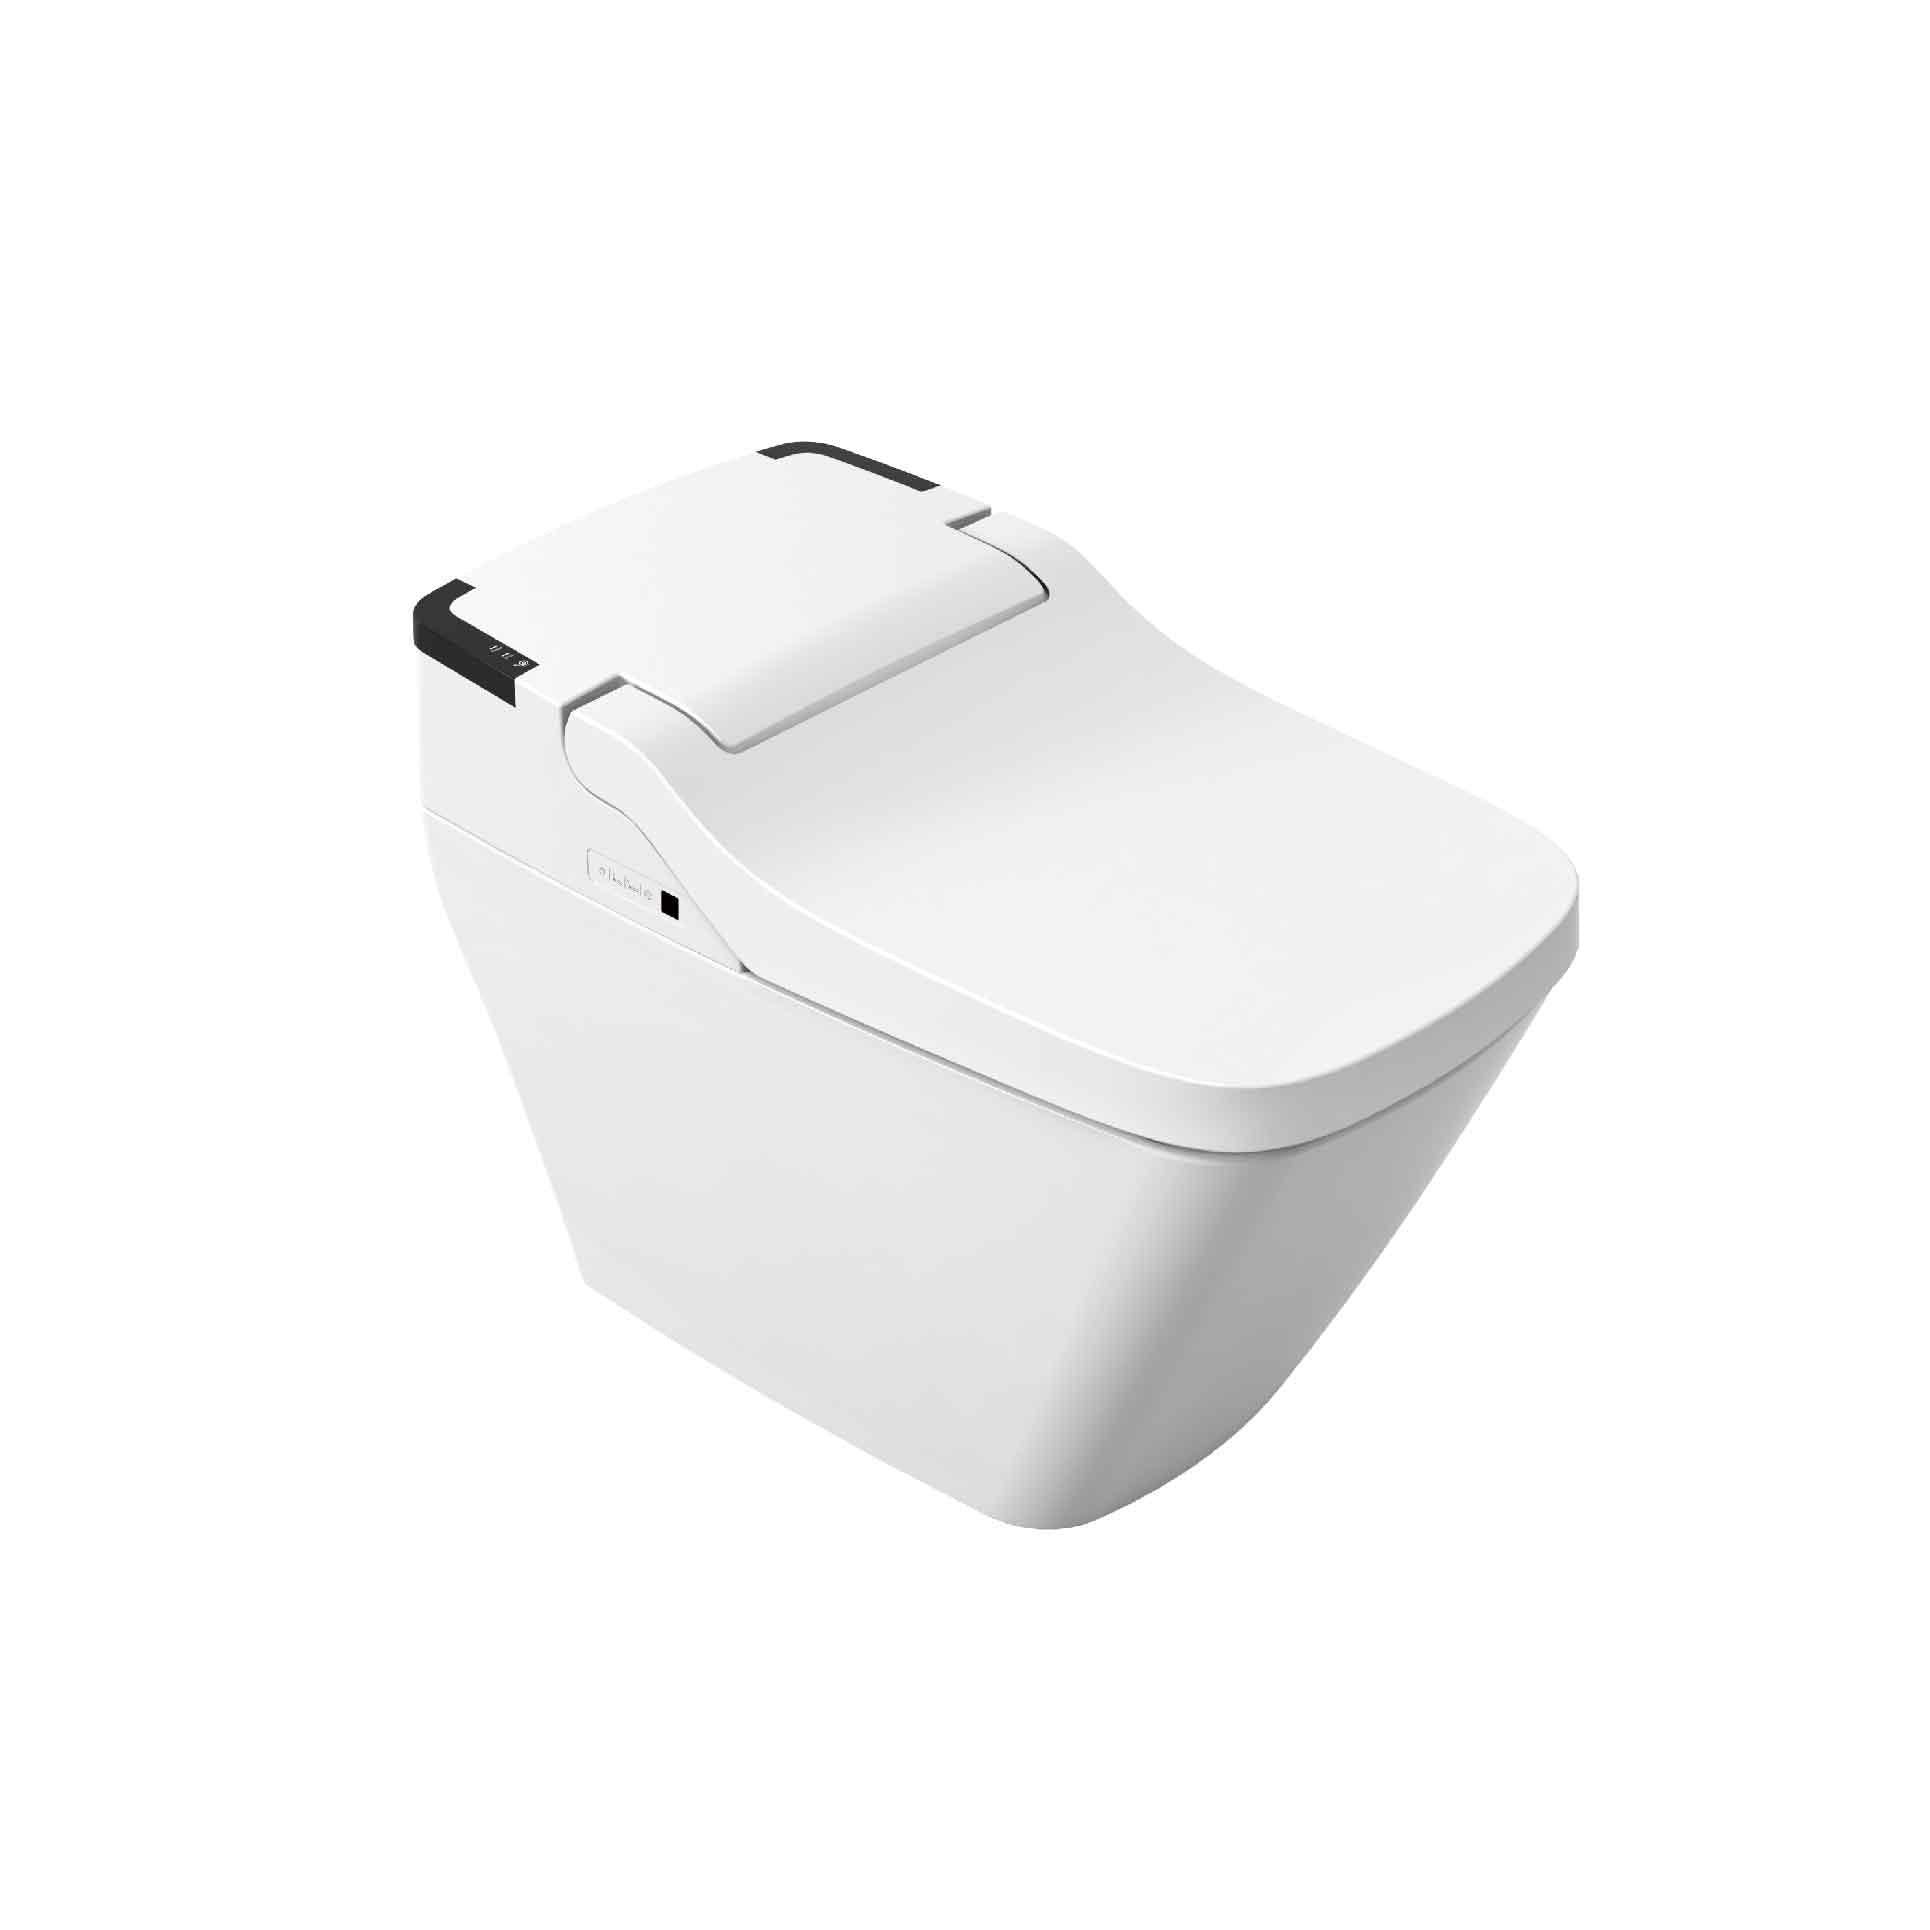 VOVO Bidet Toilet with Auto Open and Close Lid TCB-090SA